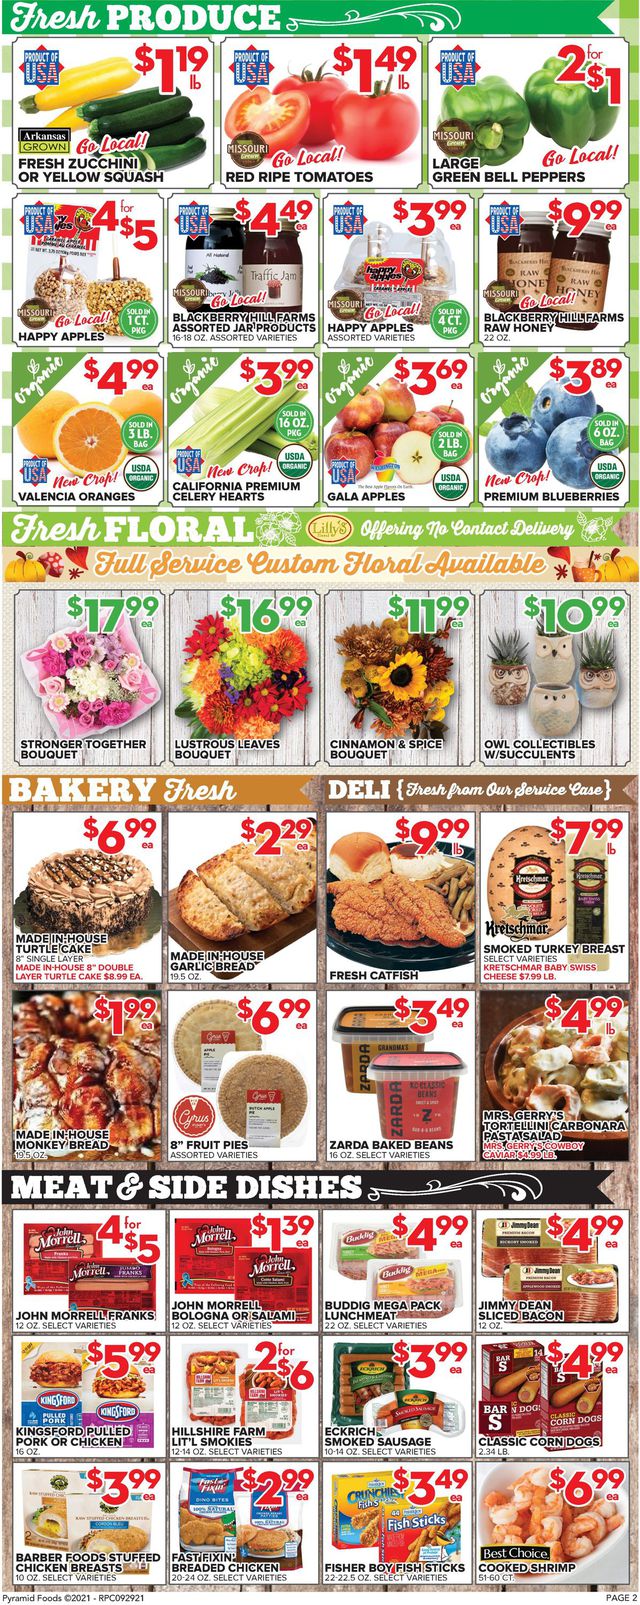 Price Cutter Ad from 09/29/2021